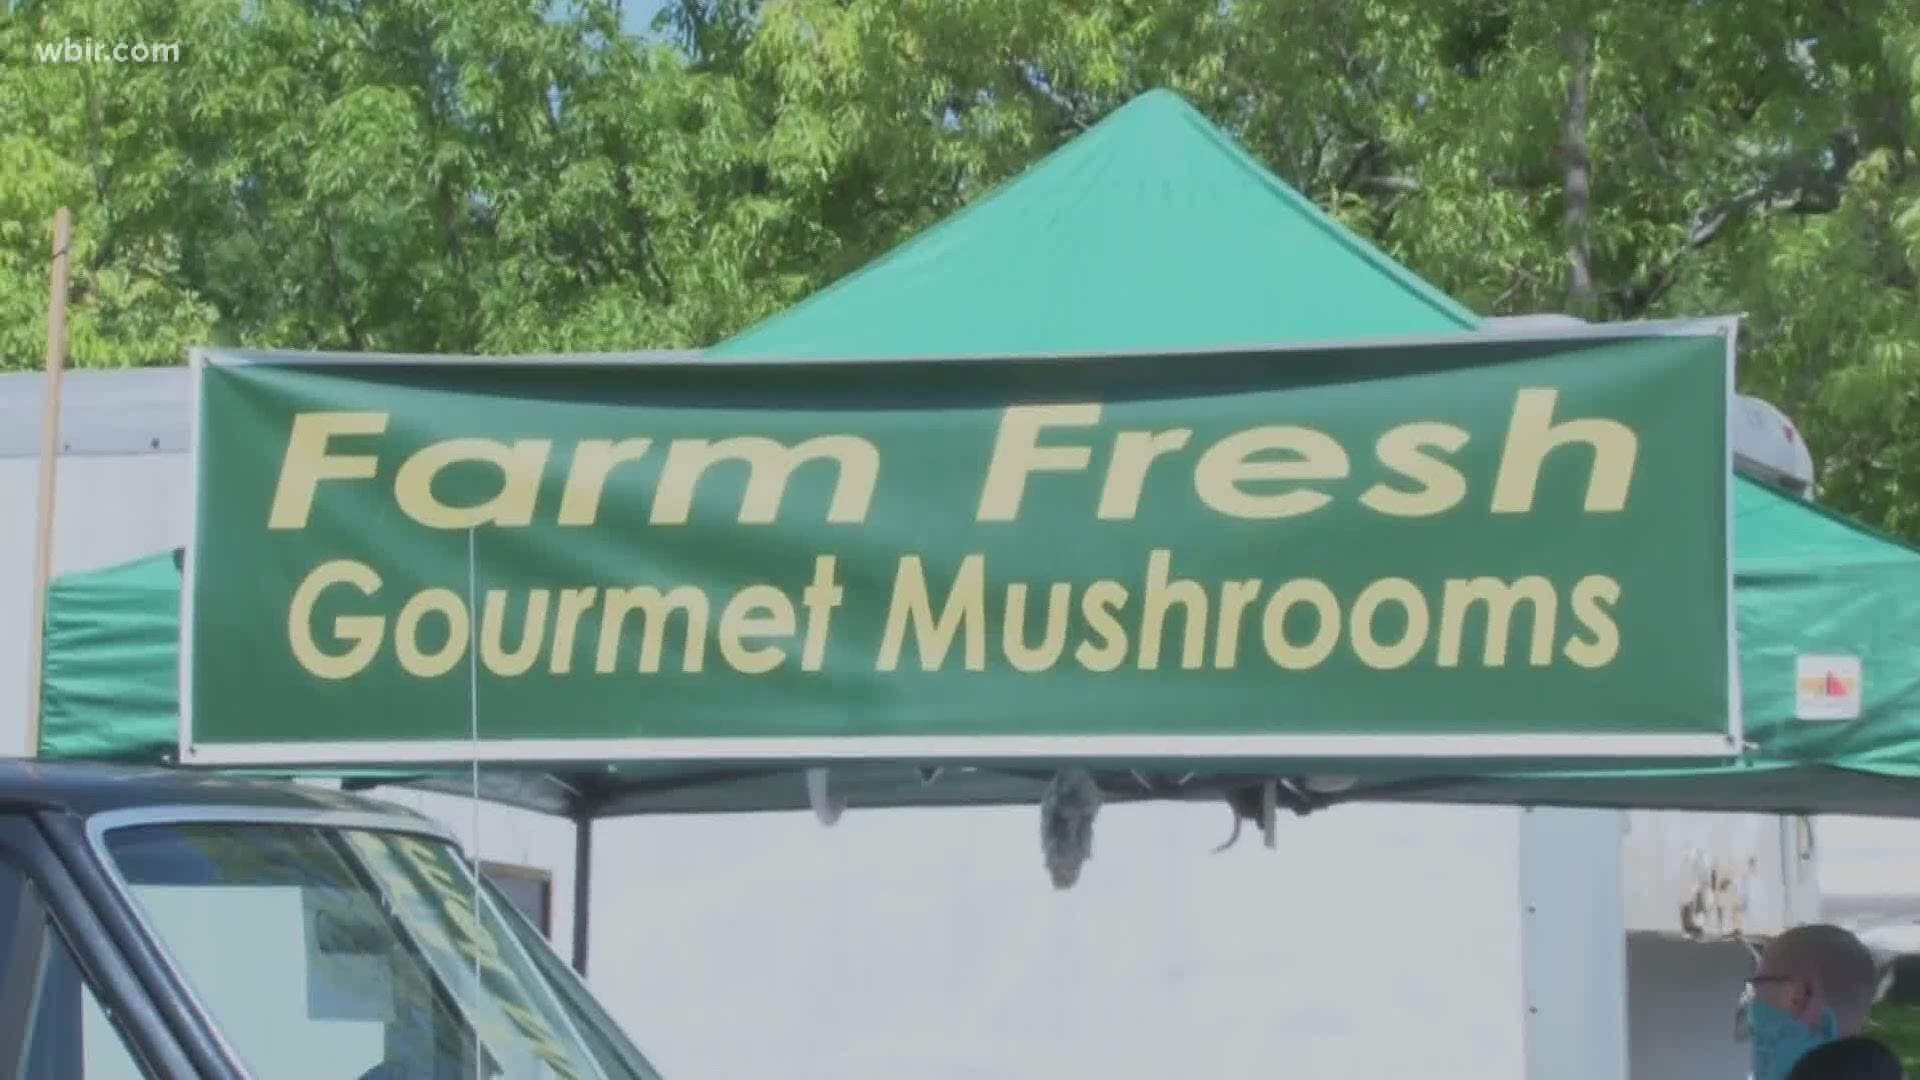 Nourish Knoxville's Farmers Market runs Saturdays (9am to 1pm) at Mary Costa Plaza and Wednesdays (10am to 1pm) at Market Square.  April 30, 2021-4pm.